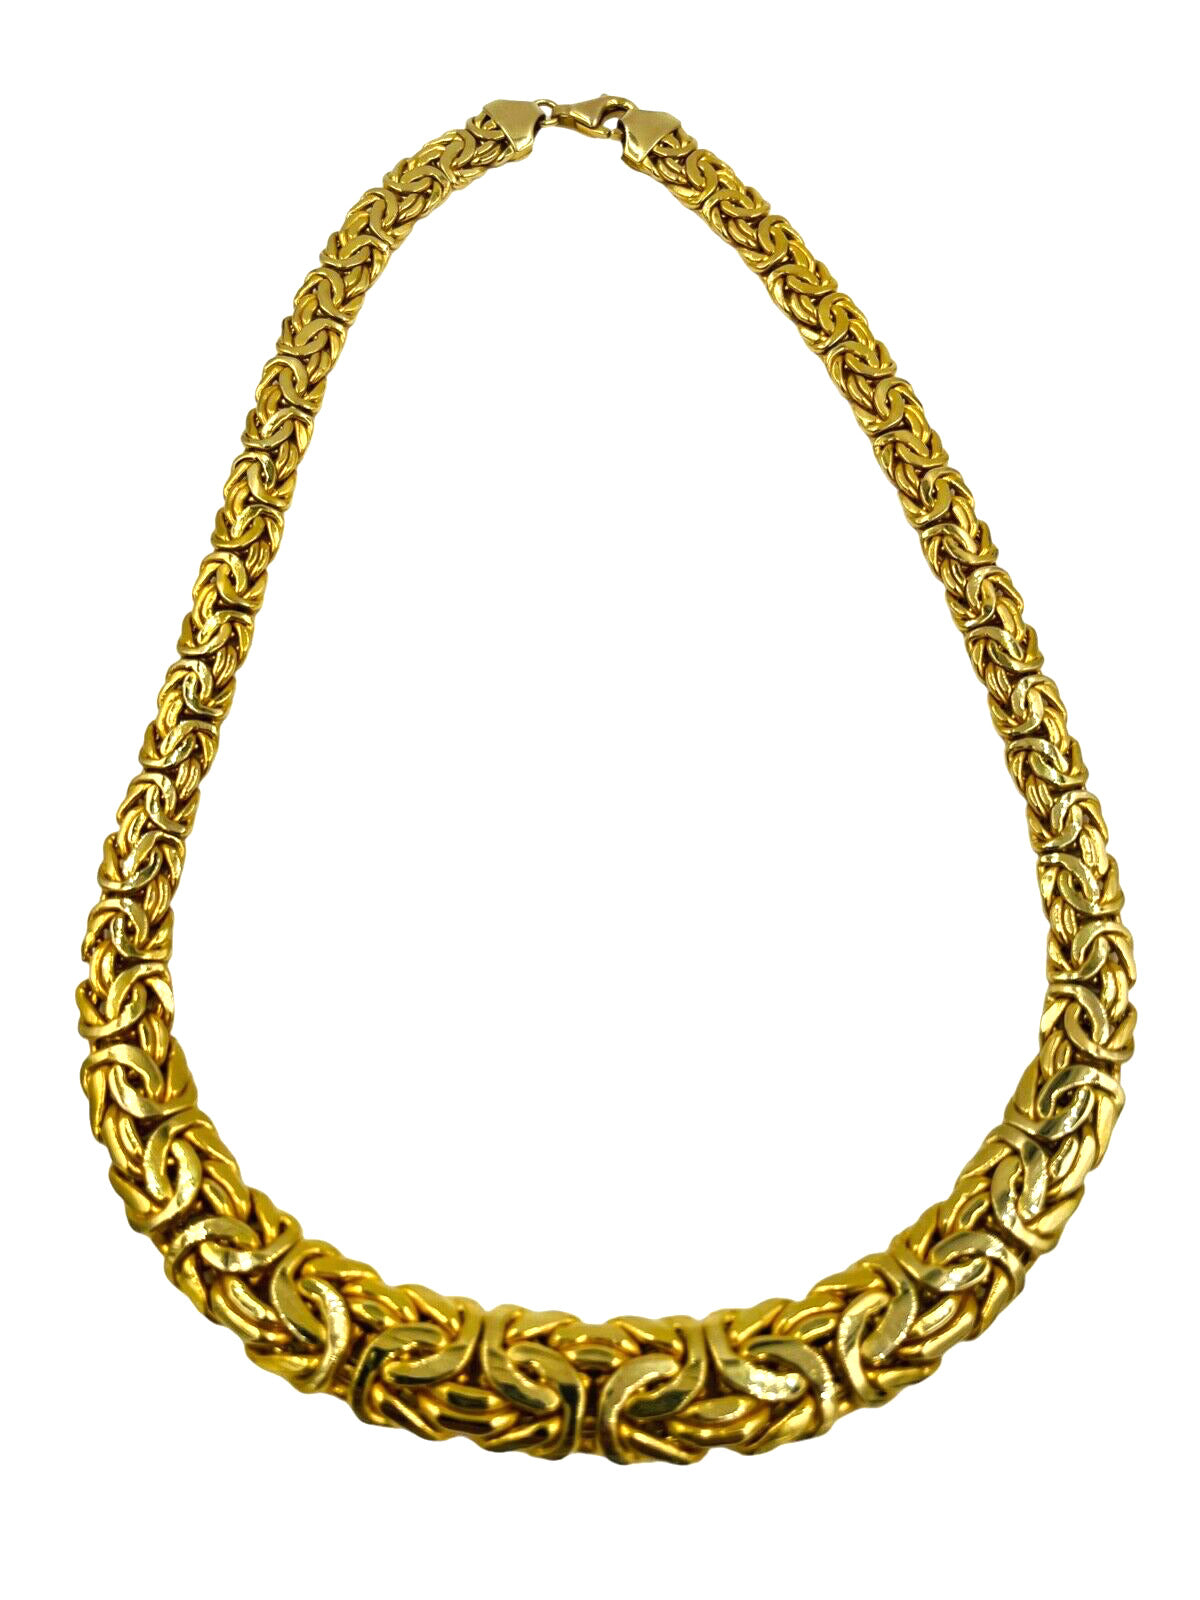 Estate 14k yellow Gold Byzantine Graduated Wide Necklace 17 1/4"